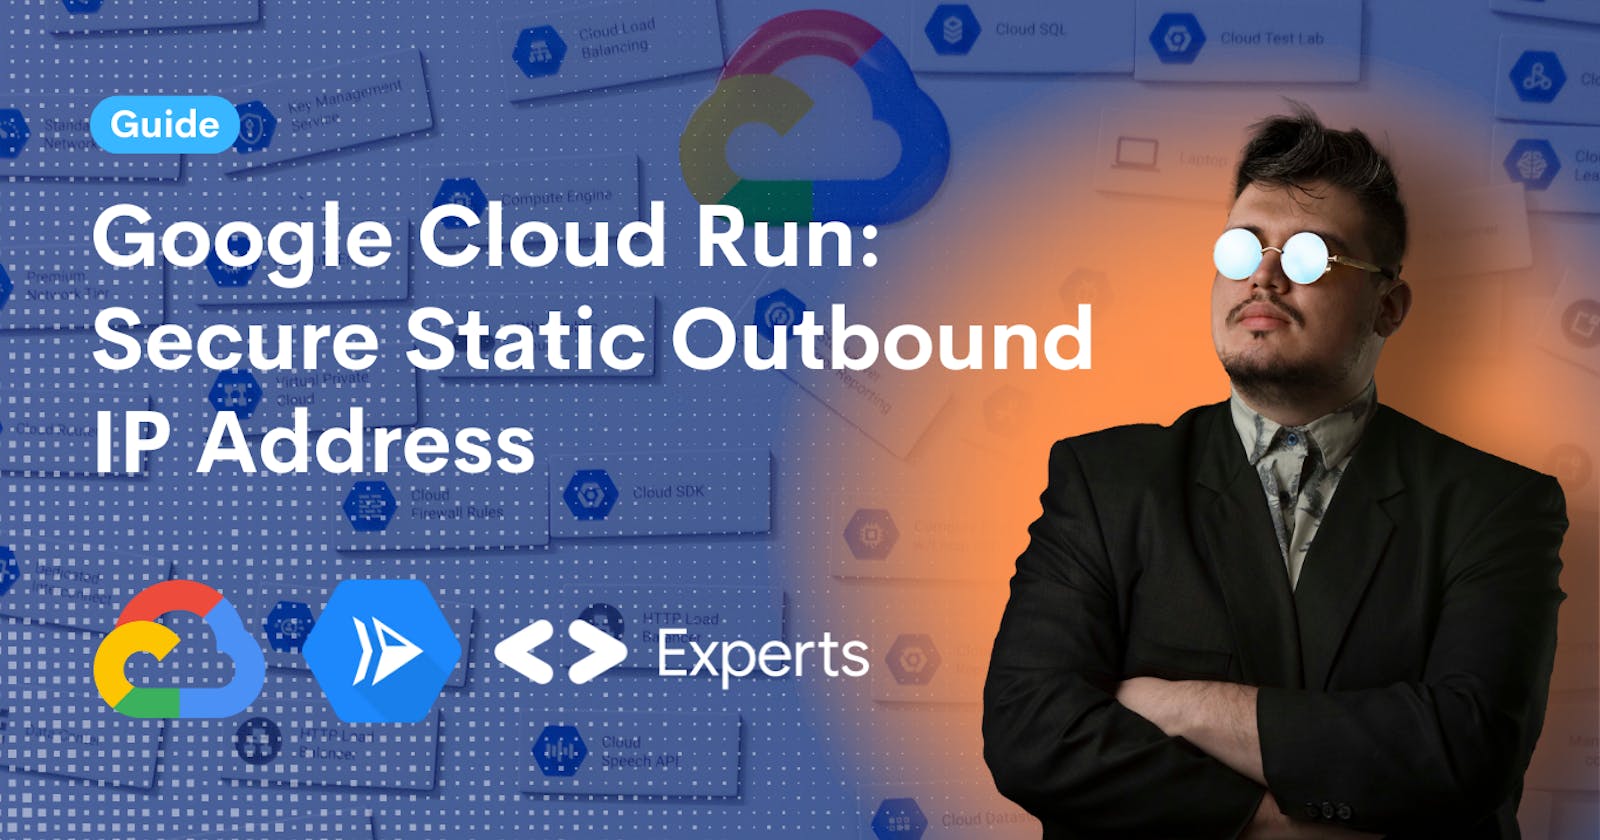 Google Cloud Run - Secure Static Outbound IP Address